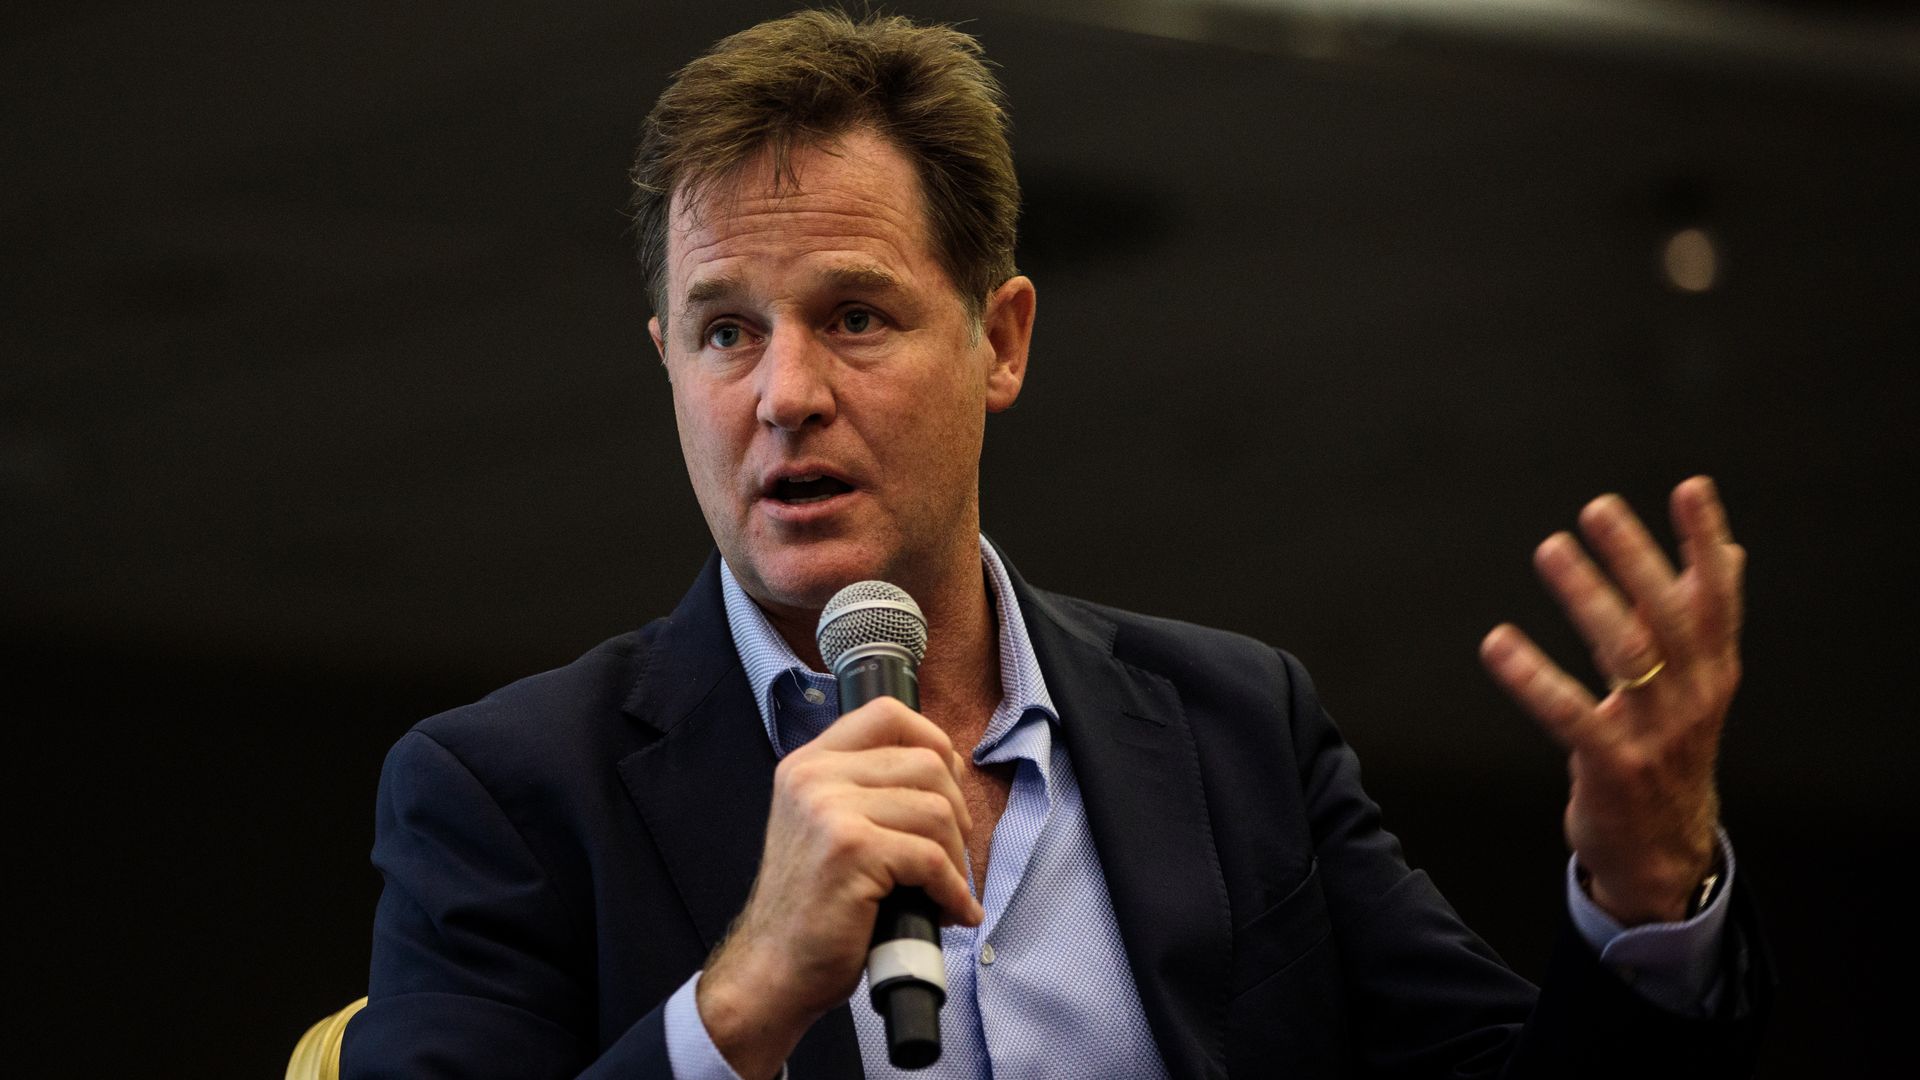  Nick Clegg, Facebook rep and former Liberal Democrats leader, speaks at a Liberal Democrat Party Conference fringe event at the Hilton Hotel in 2018 in Brighton, England. 